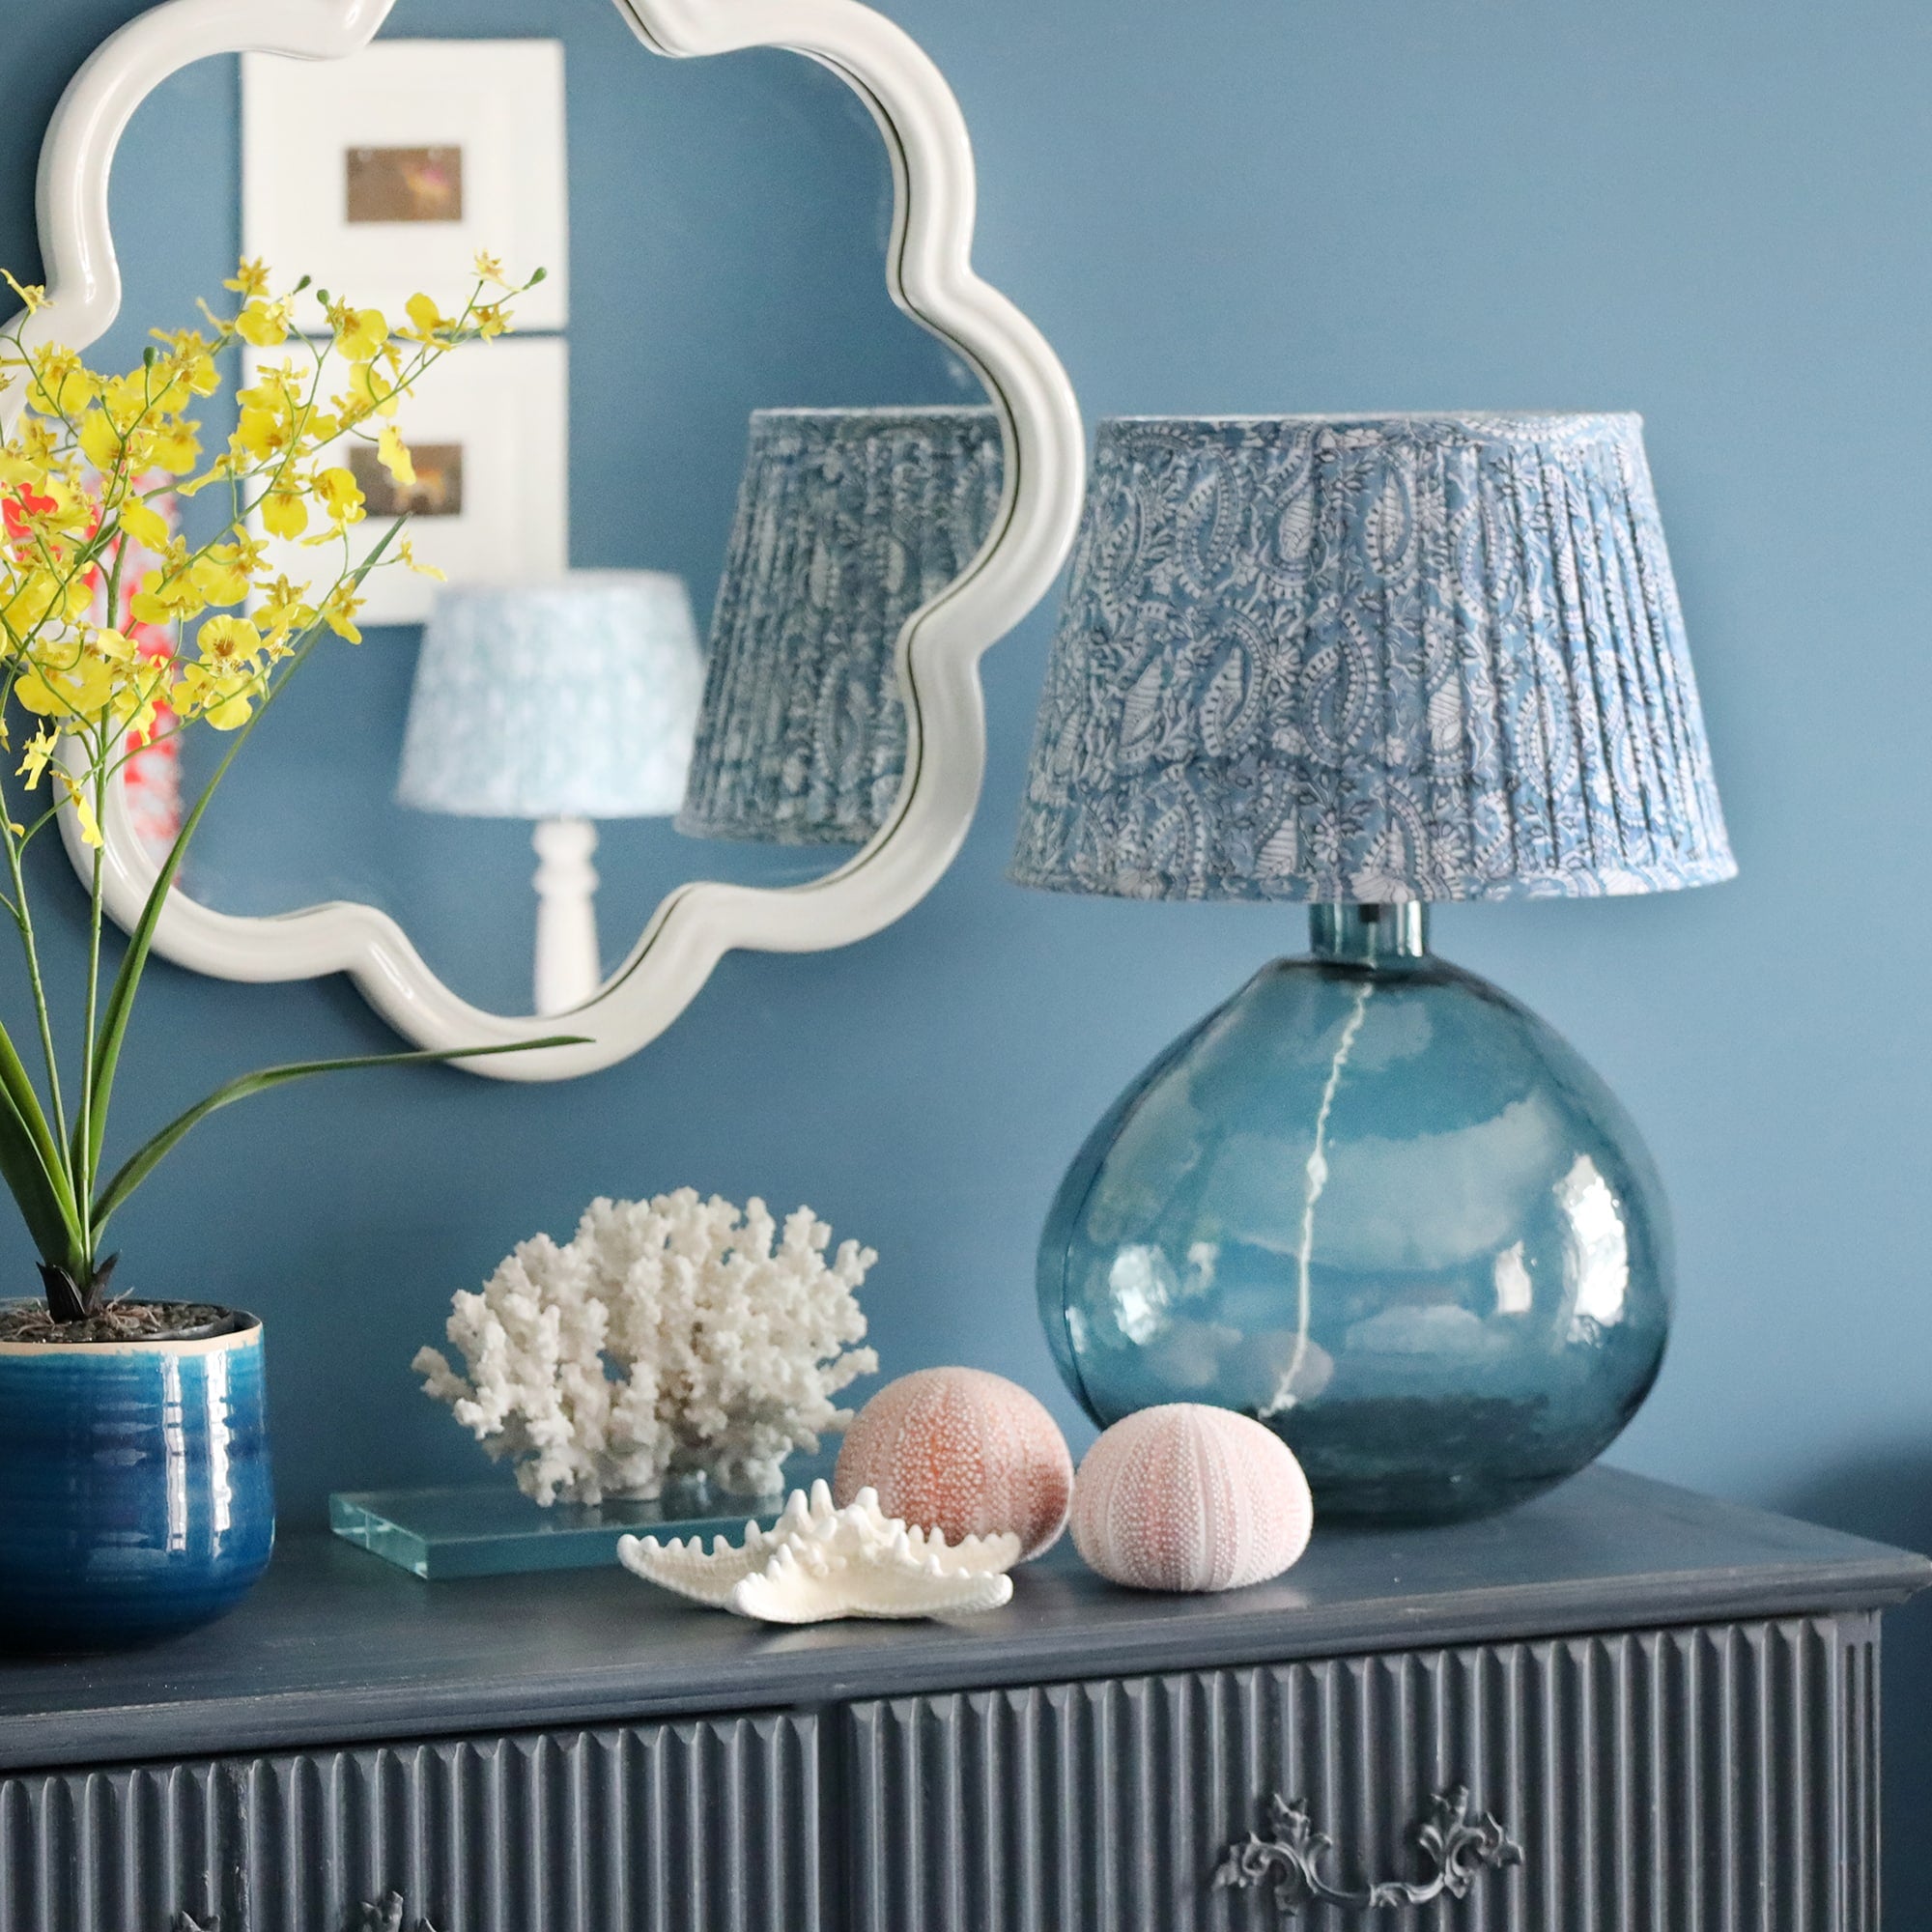 Large Azure paisley pleated lampshade on a seaglass lampbase placed on a sideboard.On the sideboard are various seashells and a plant in a blue pot,in the background is a white wave mirror on the wall